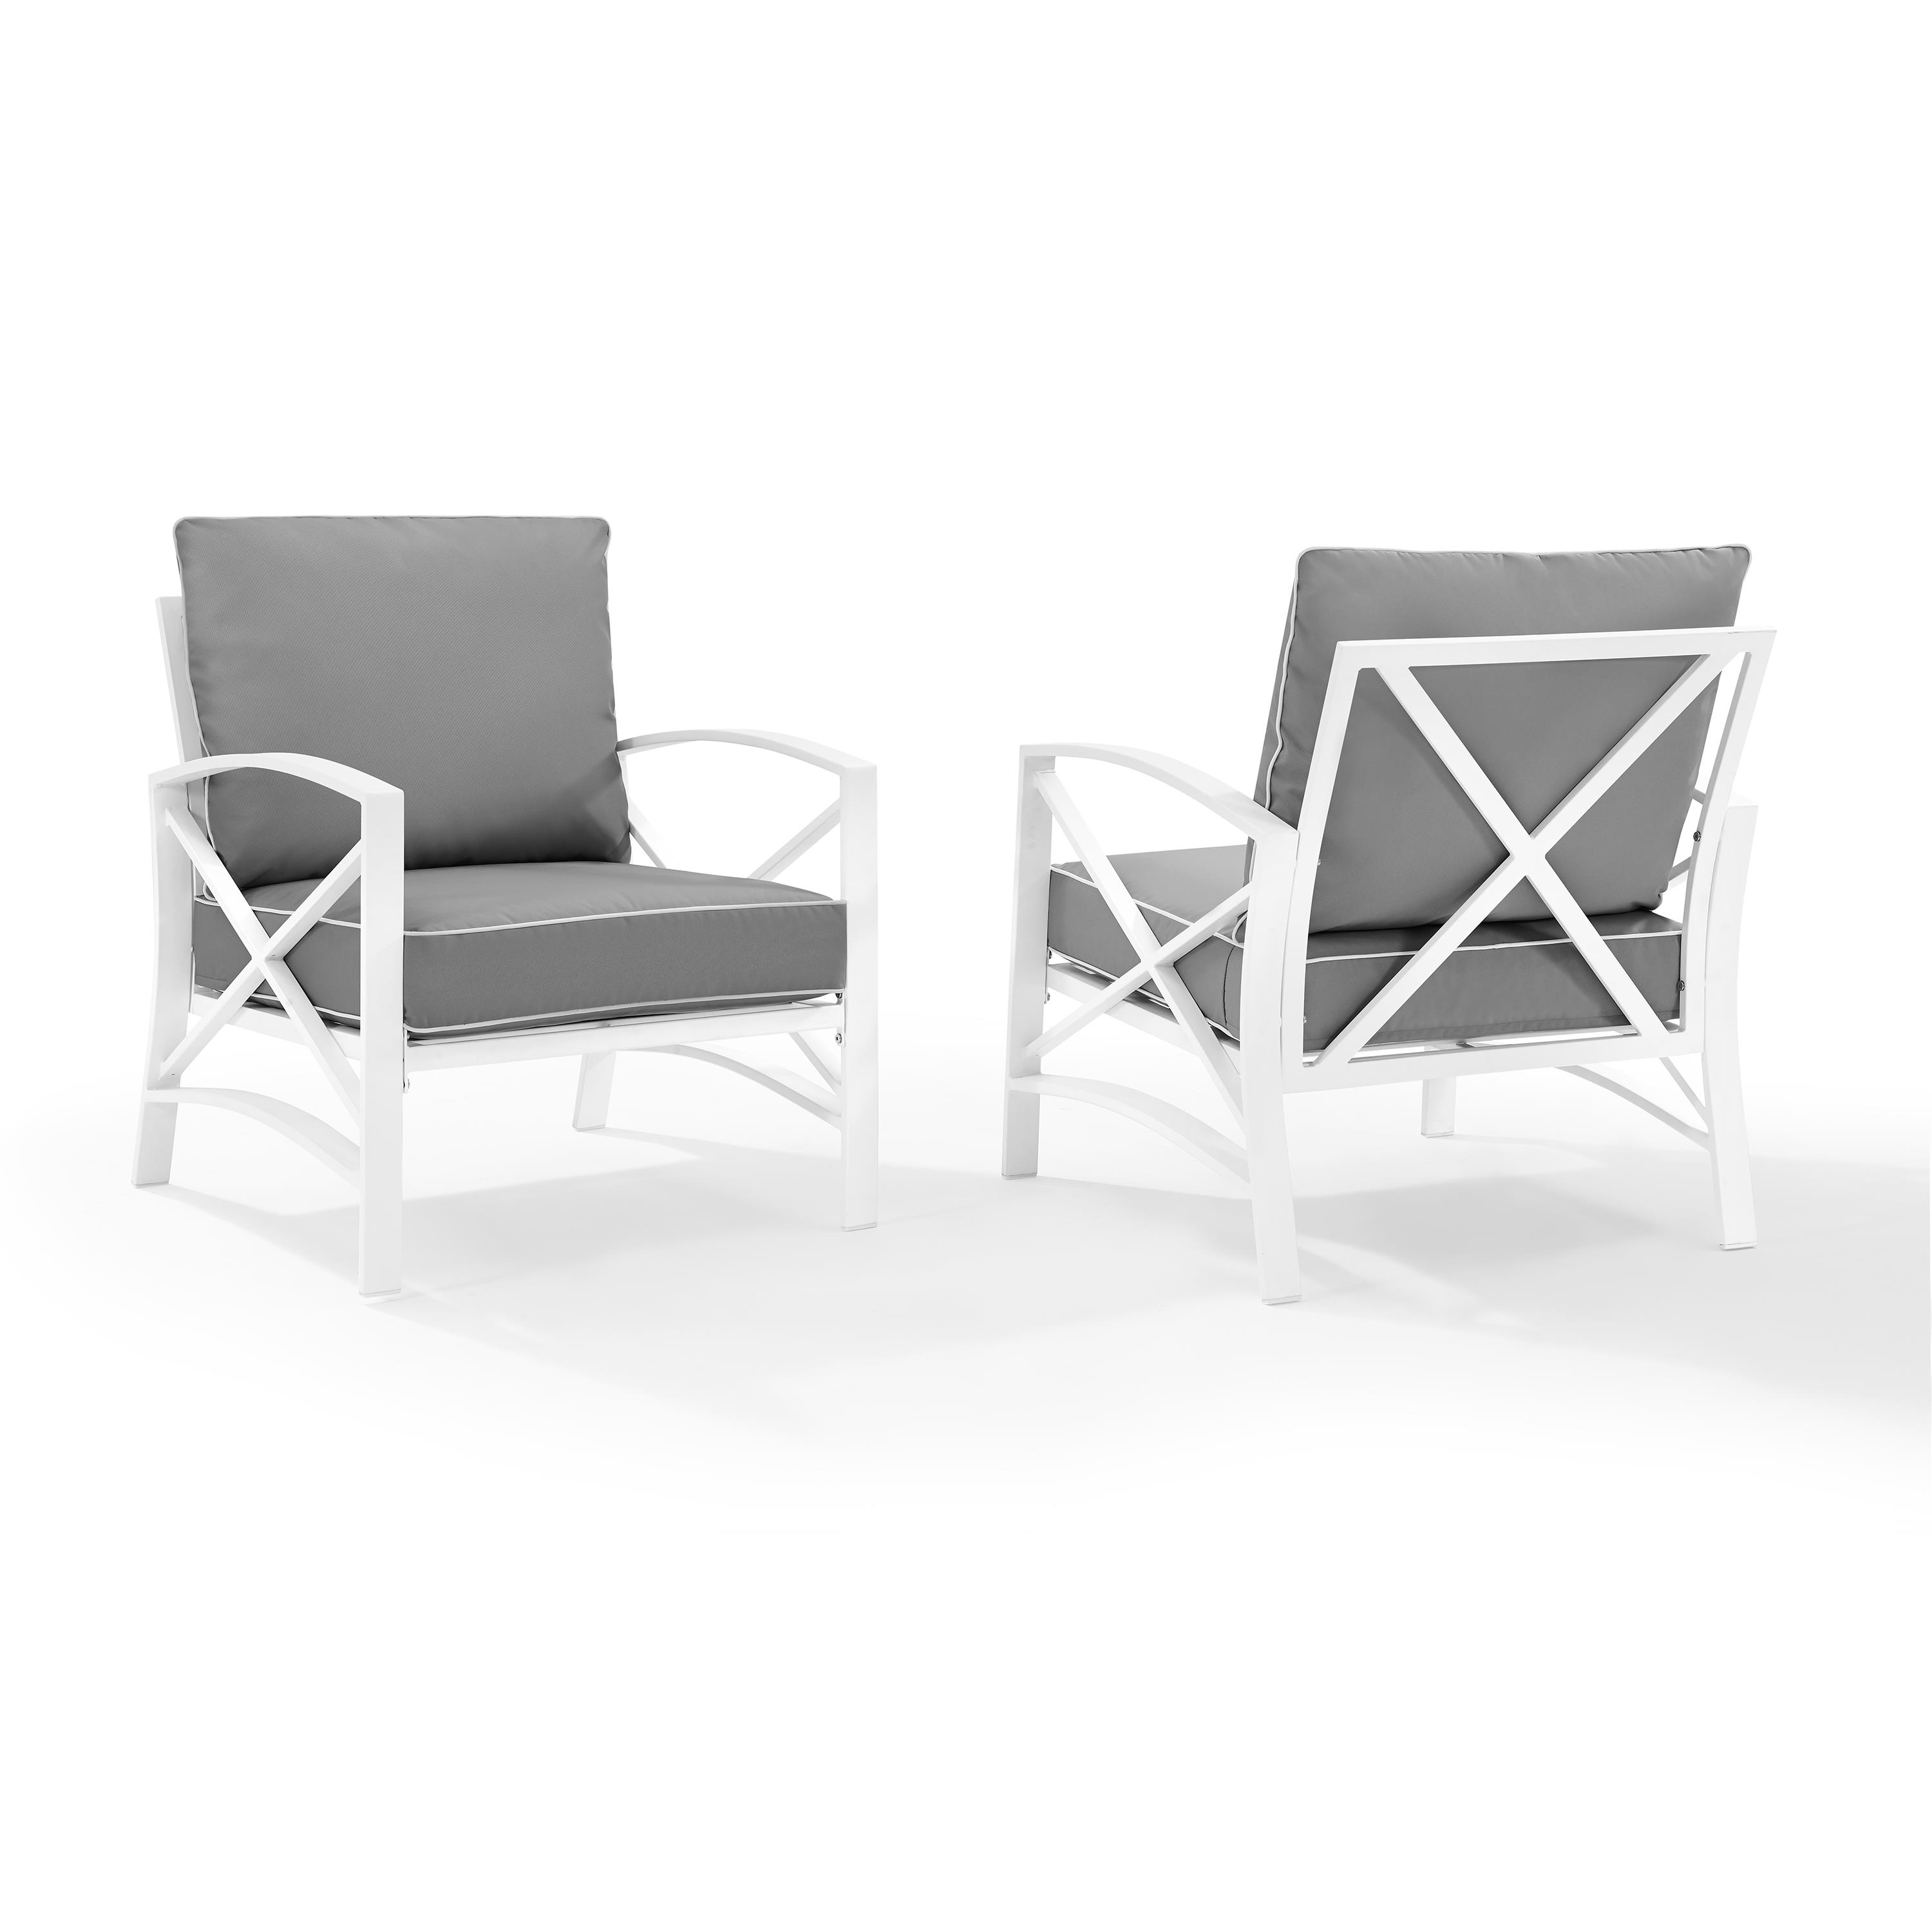 Crosley Kaplan Patio Arm Chair in Gray and White (Set of 2) - image 2 of 7